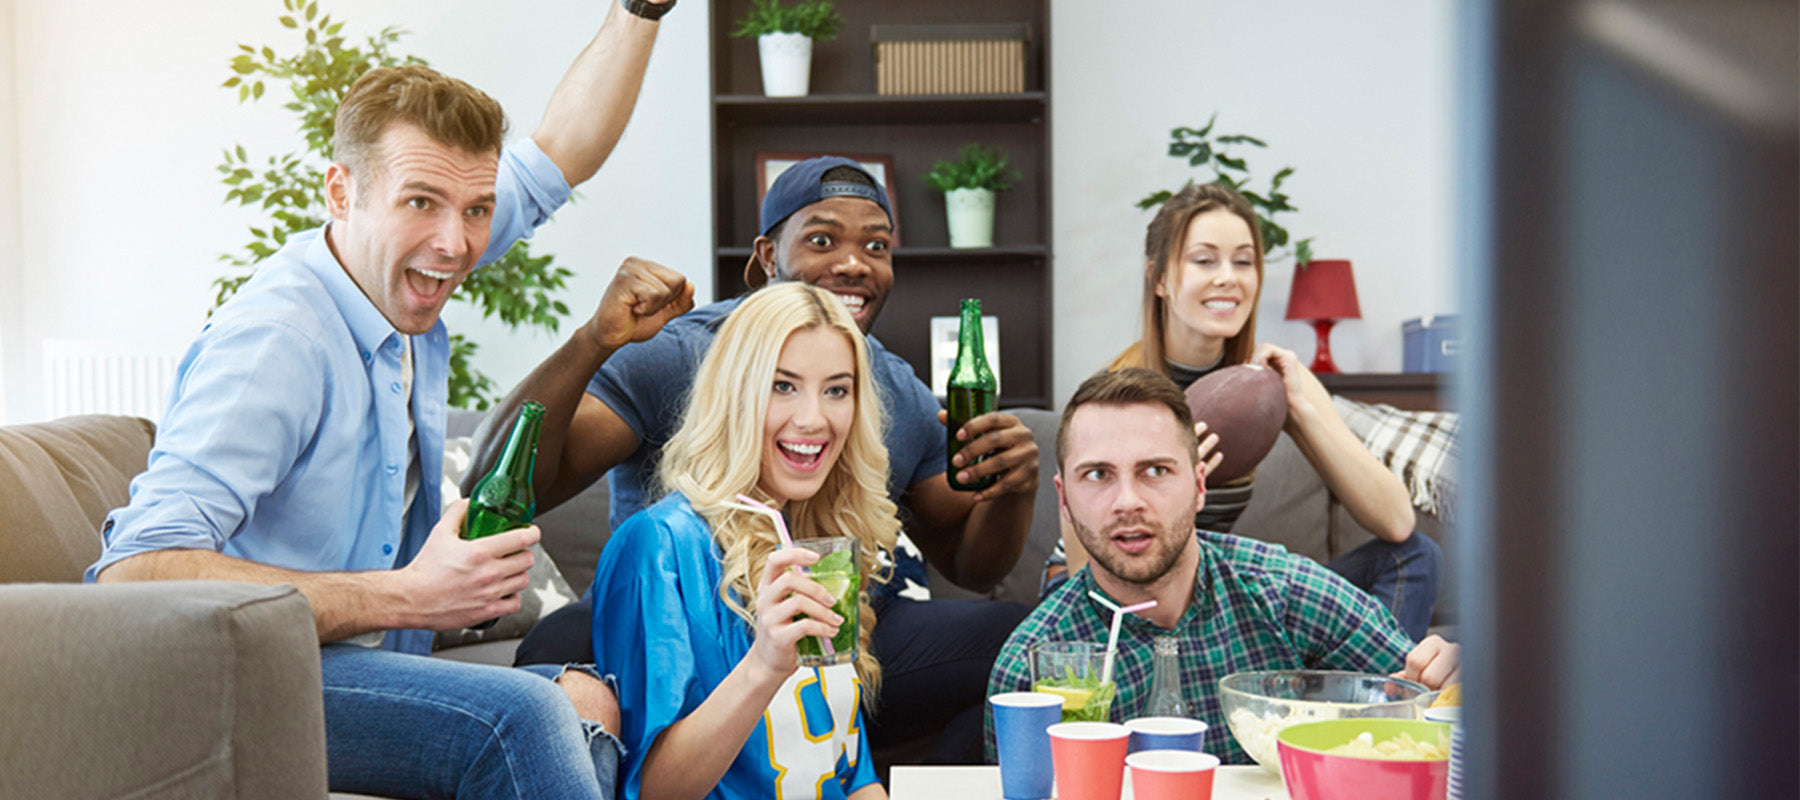 Getting Ready for the Big Game | Football Party Tips from Urban Transit